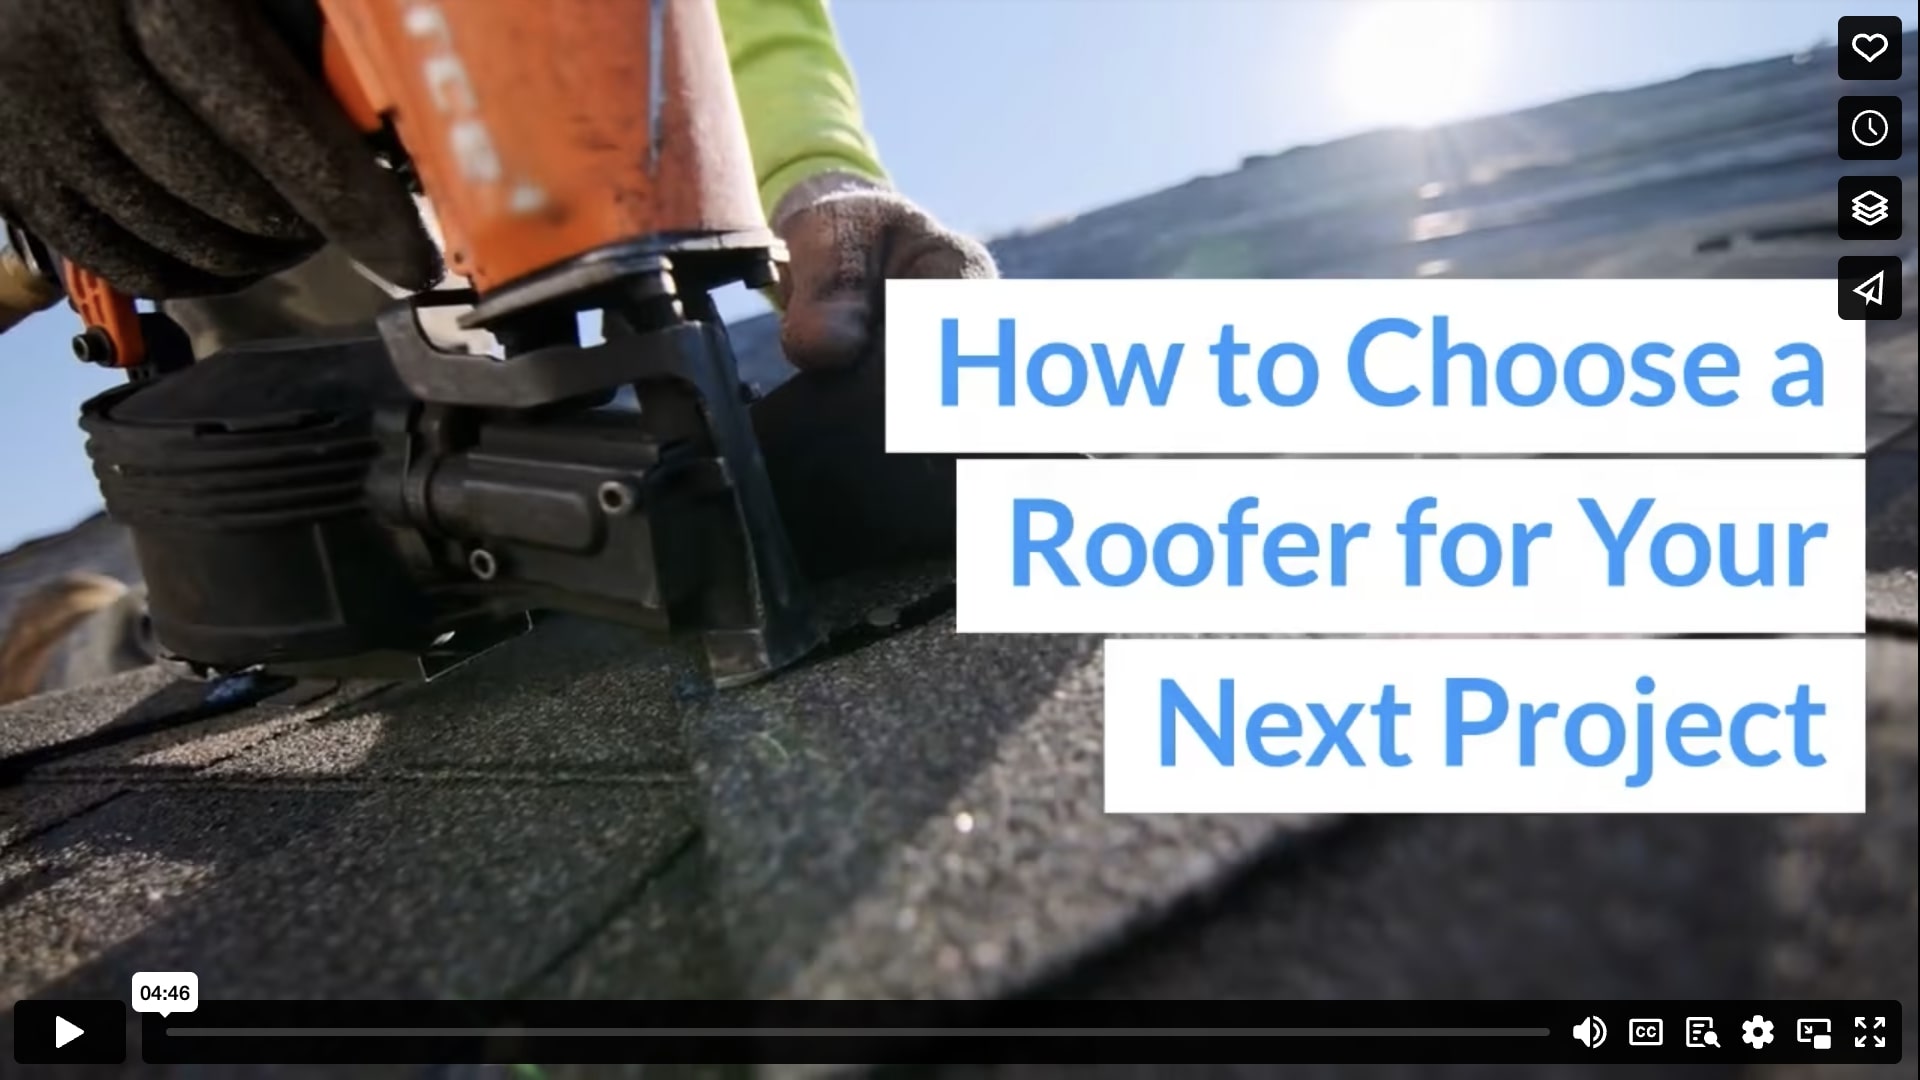 How to Choose a Roofer for Your Next Project